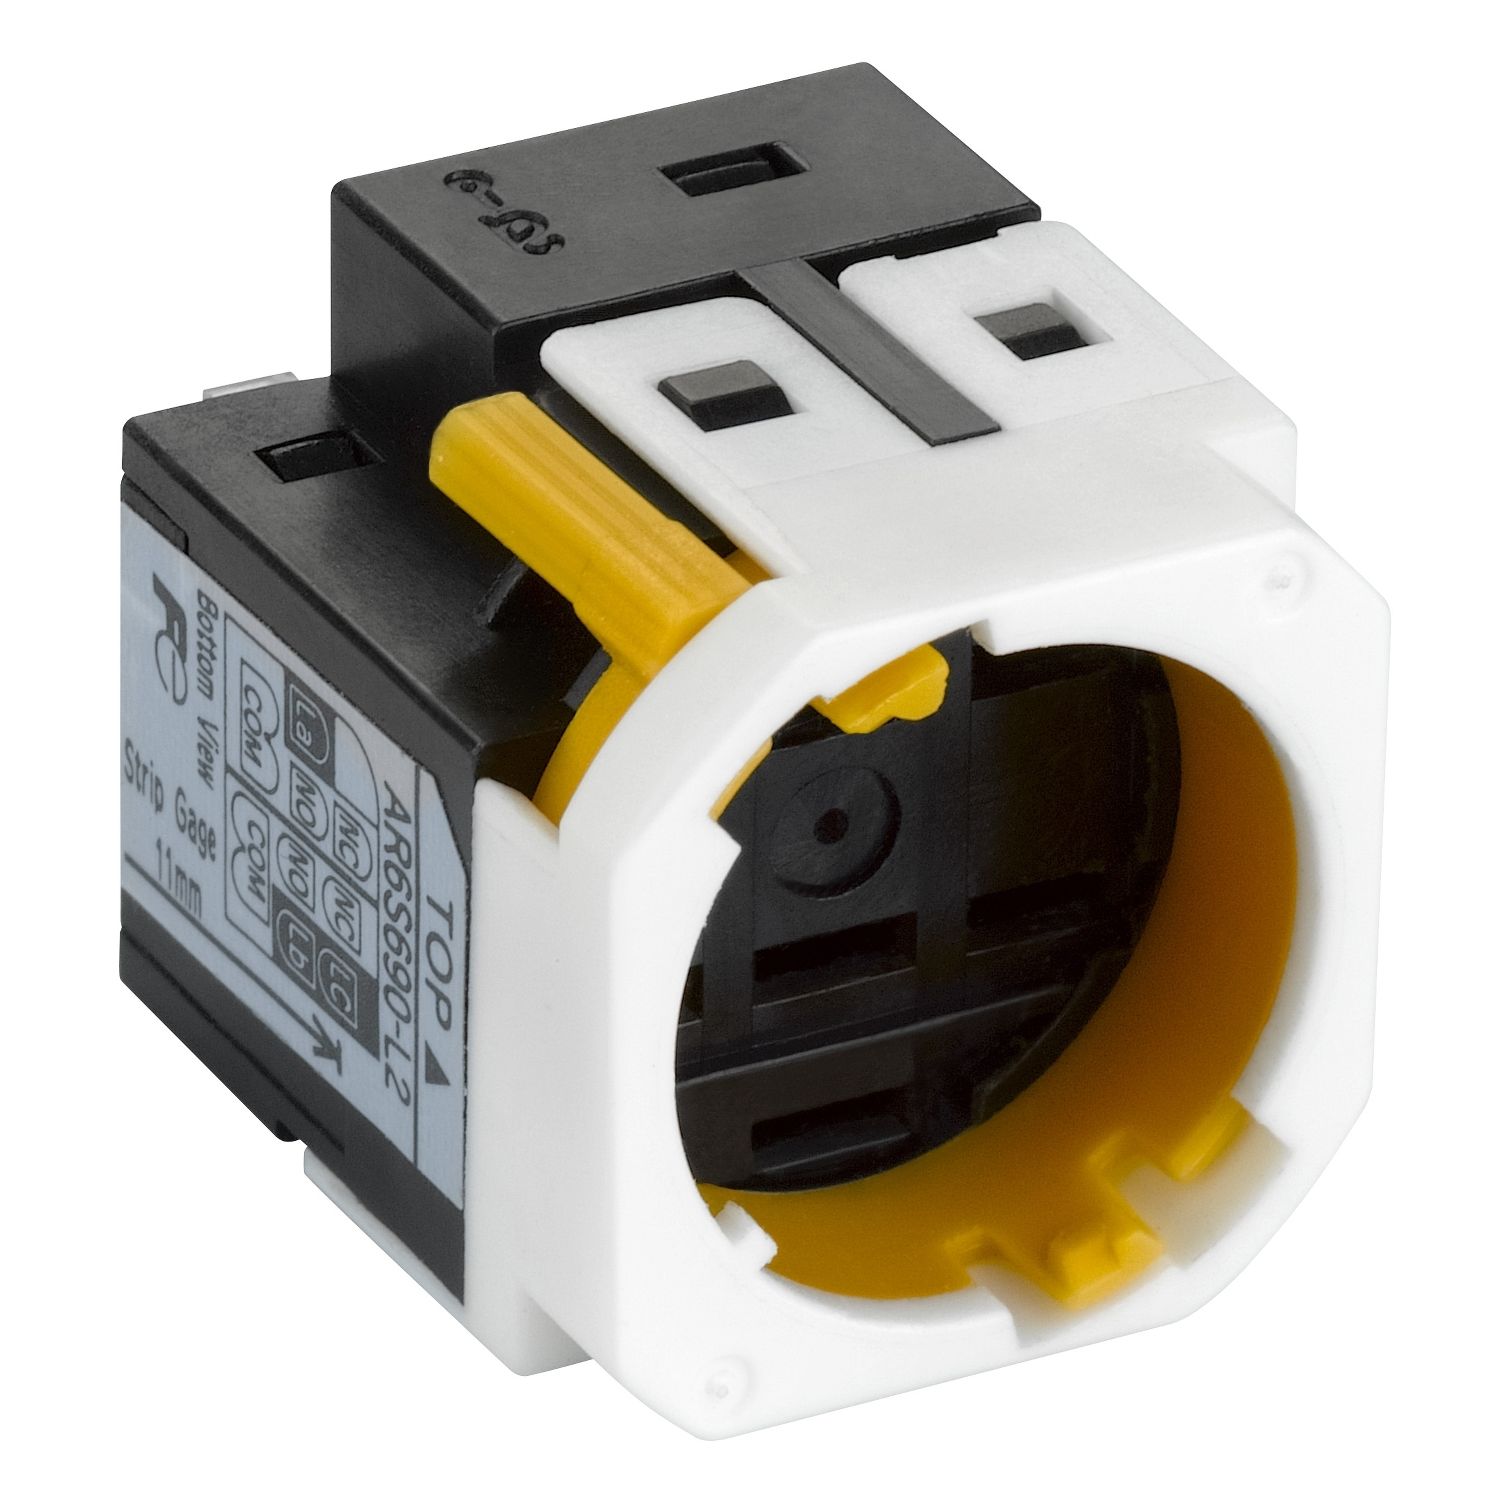 ZB6YF04 Harmony XB6E, Fast connector socket for PB and SS, 1 NO/NC